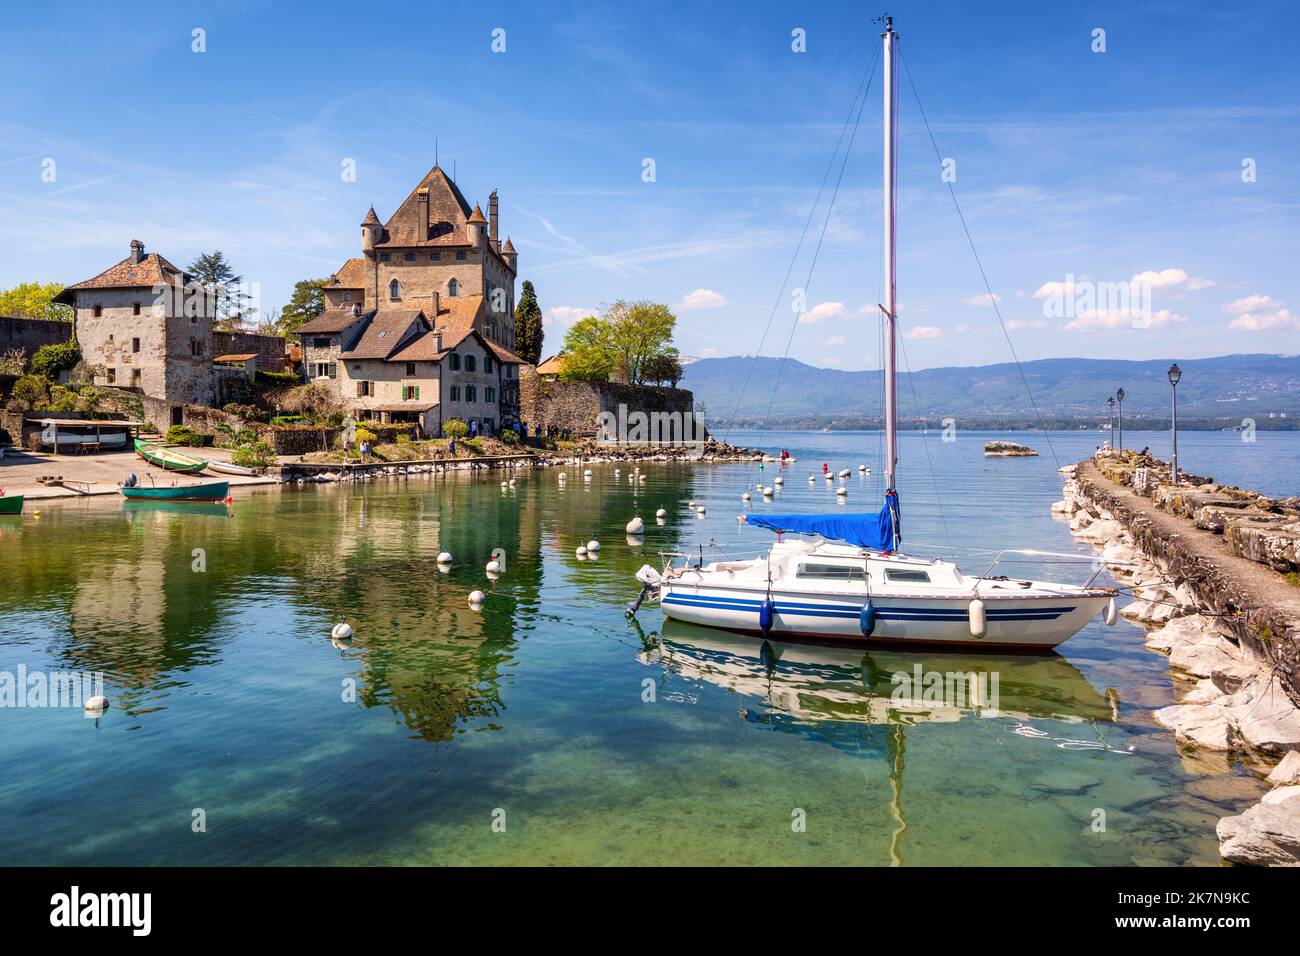 The castle and harbor of medieval Yvoire town on Lake Geneva, France. Yvoire is known as one of the most beautiful villages of France. Stock Photo